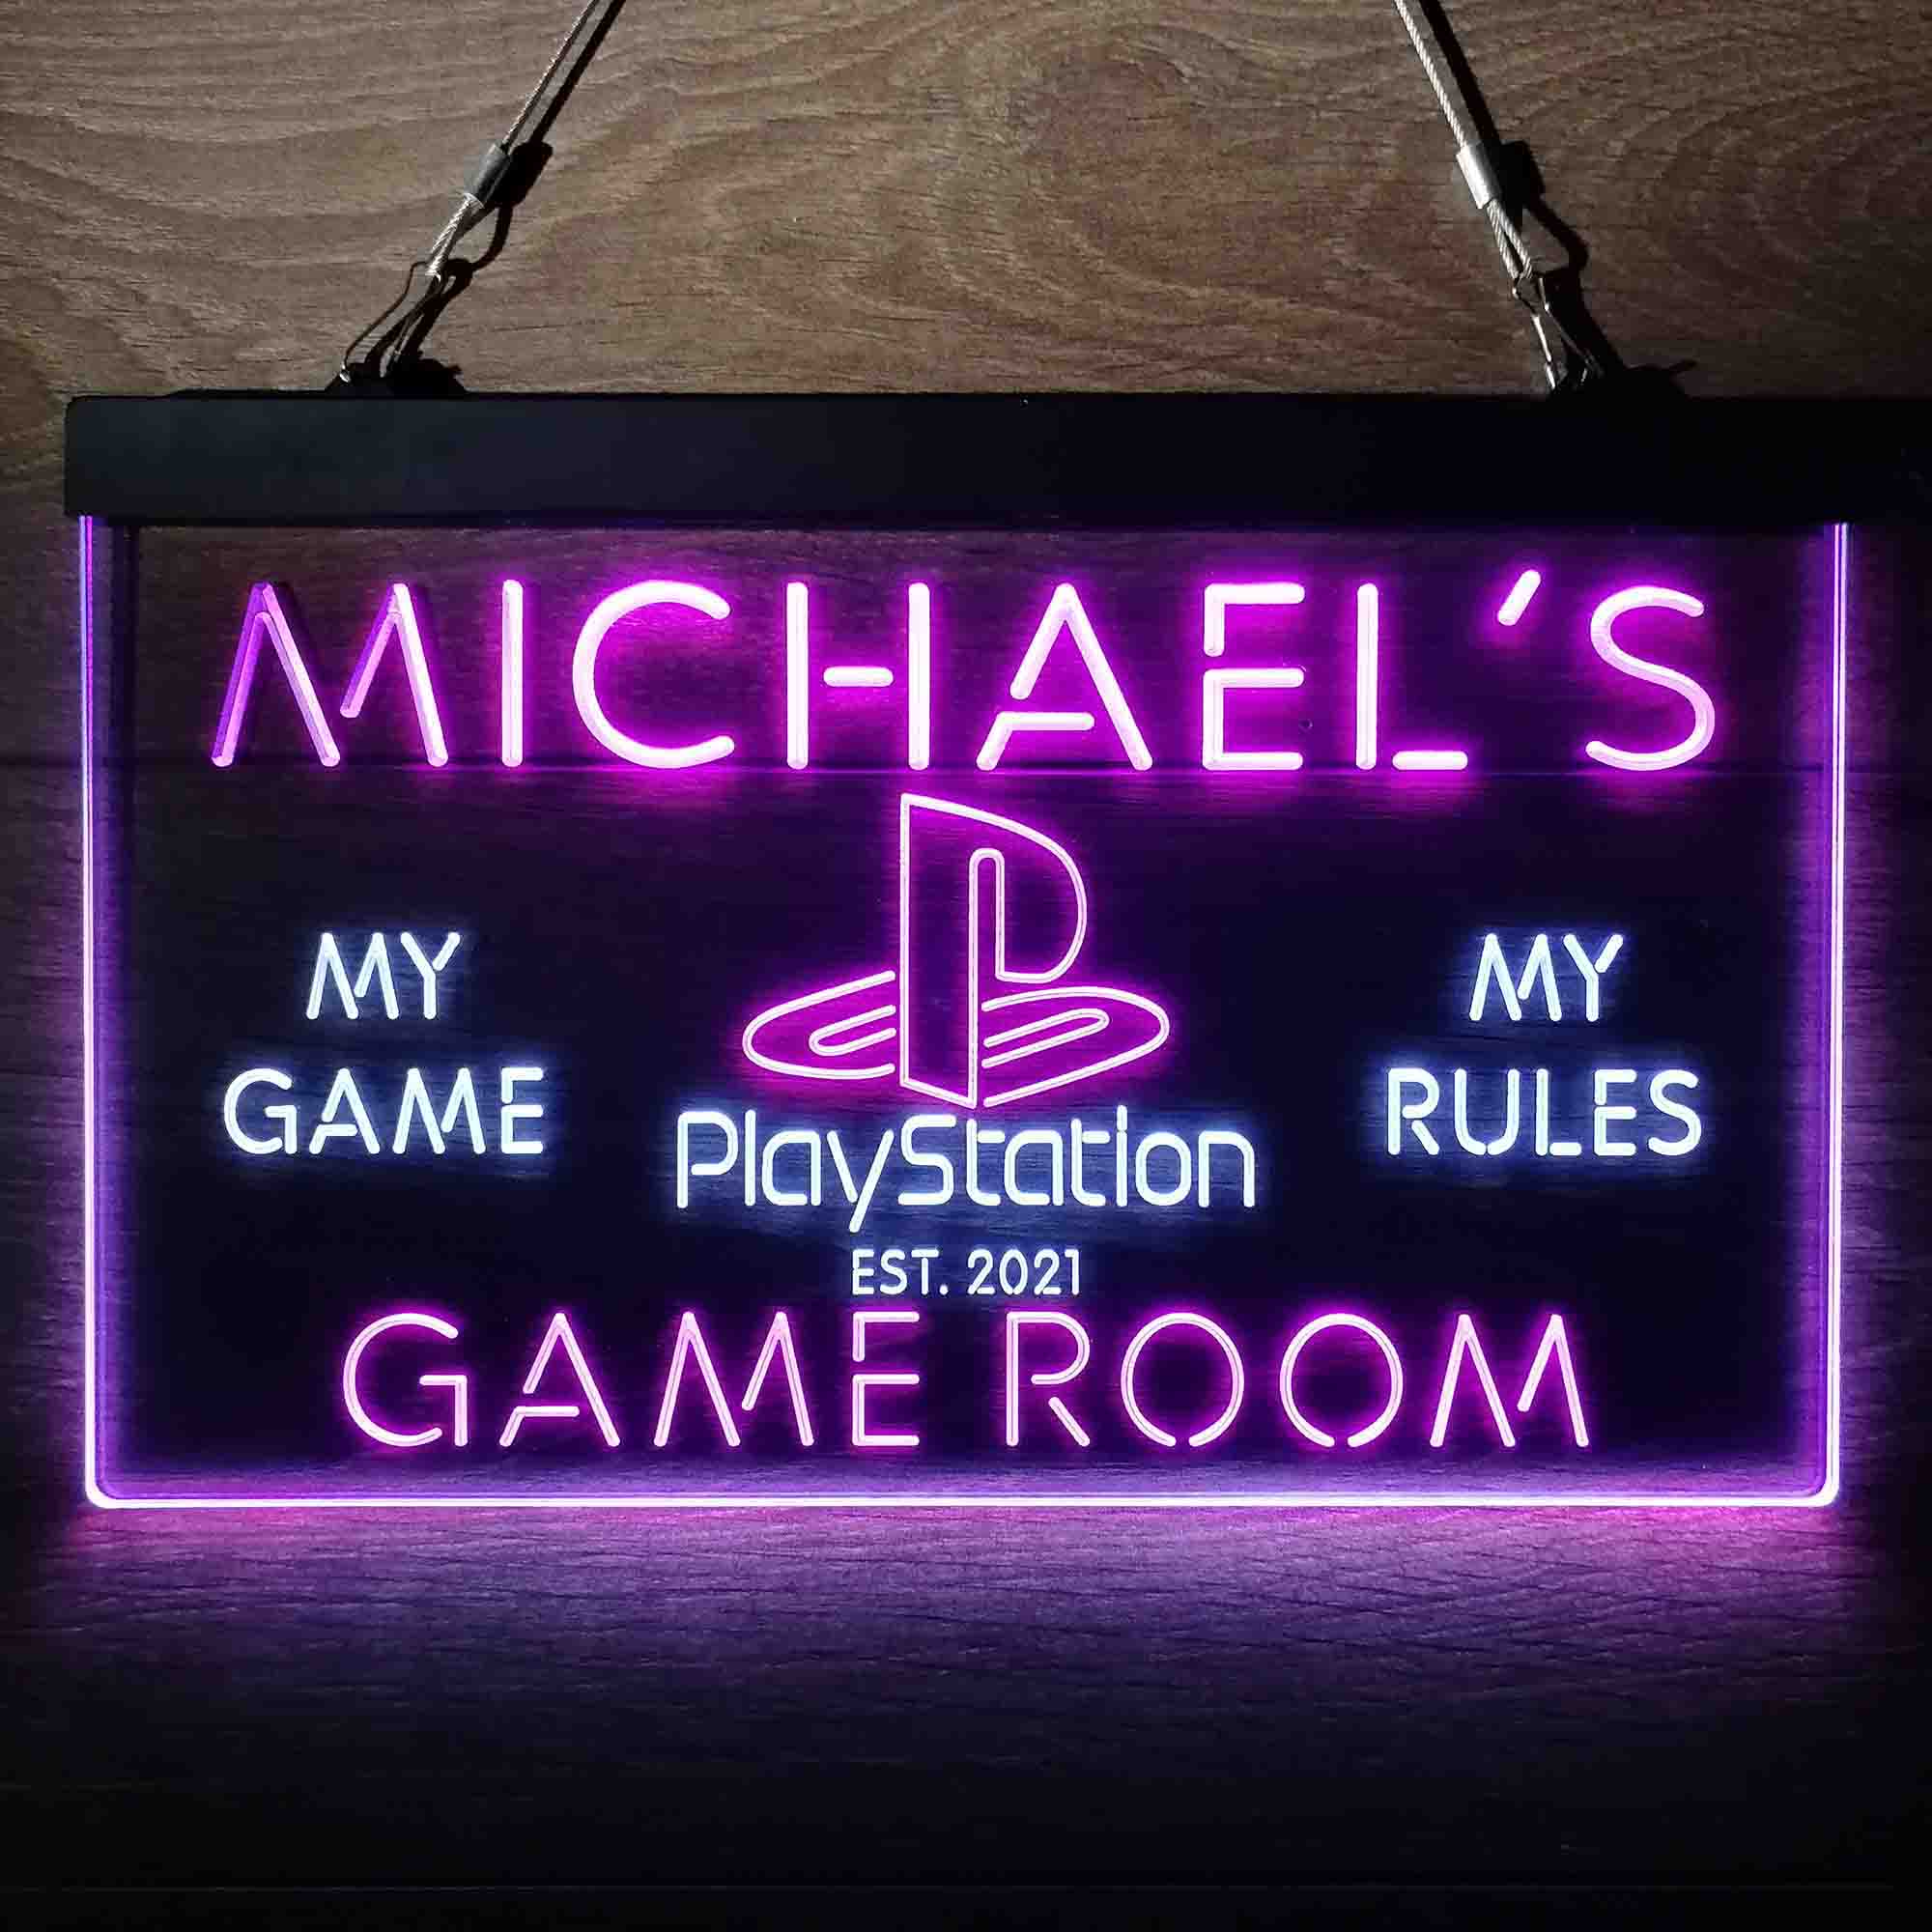 Playstation PS4 Game Room Neon LED Sign | PRO LED SIGN